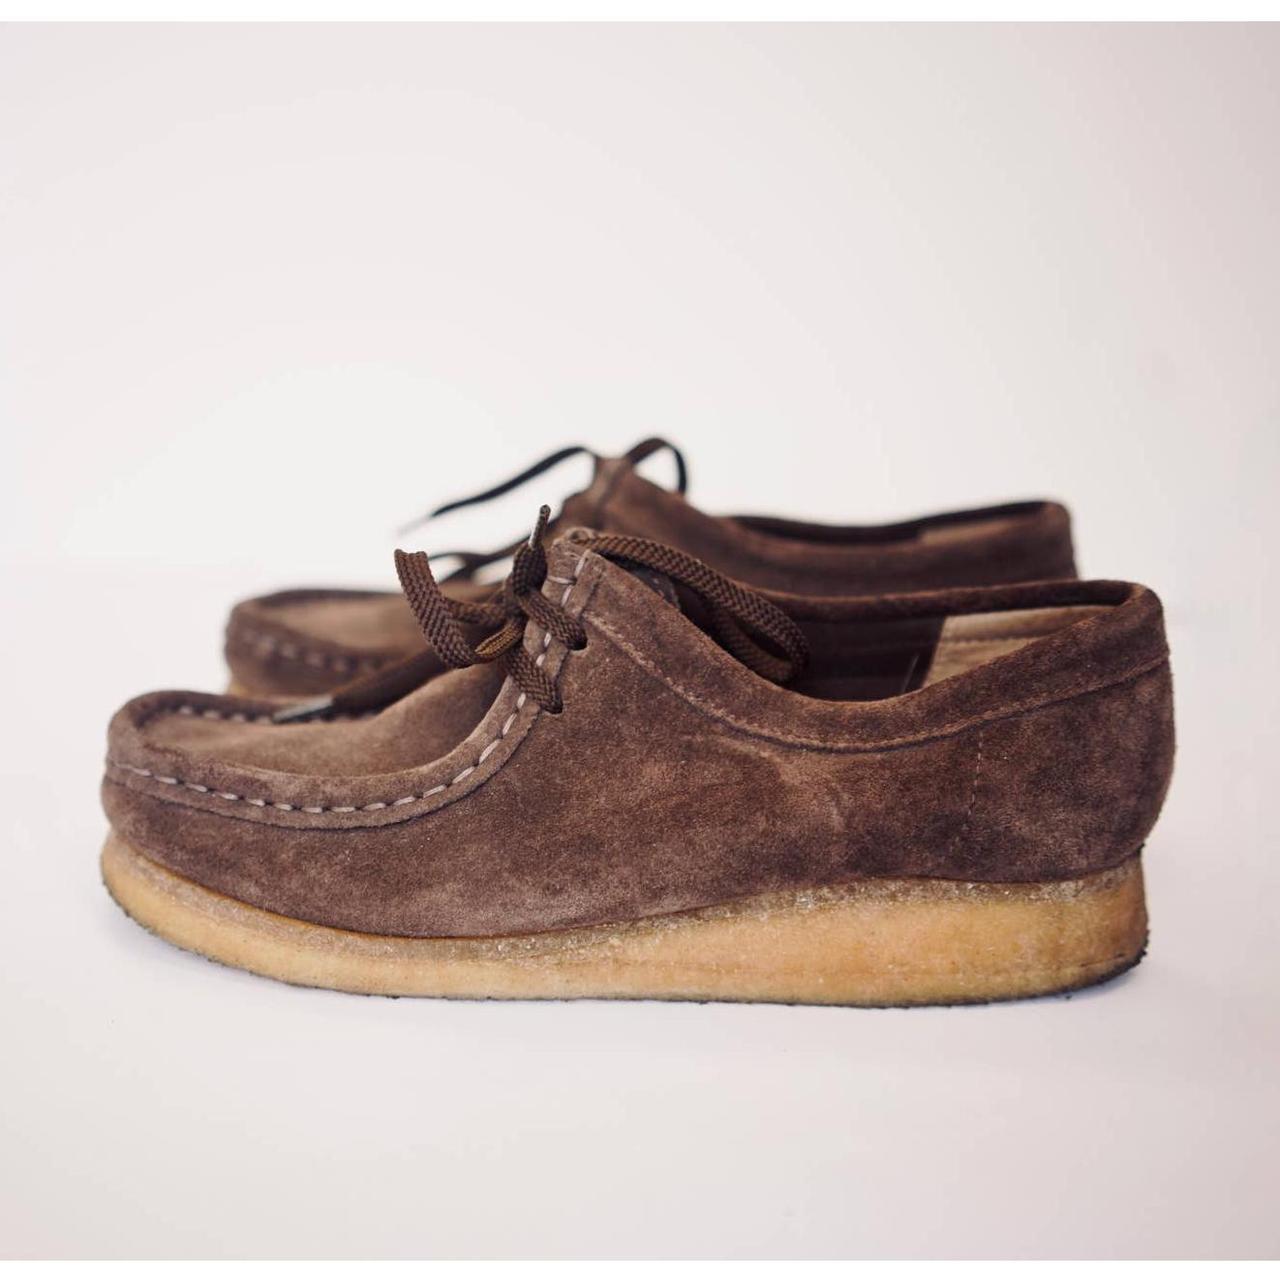 Product Image 1 - Clarks Wallabees brown suede, low